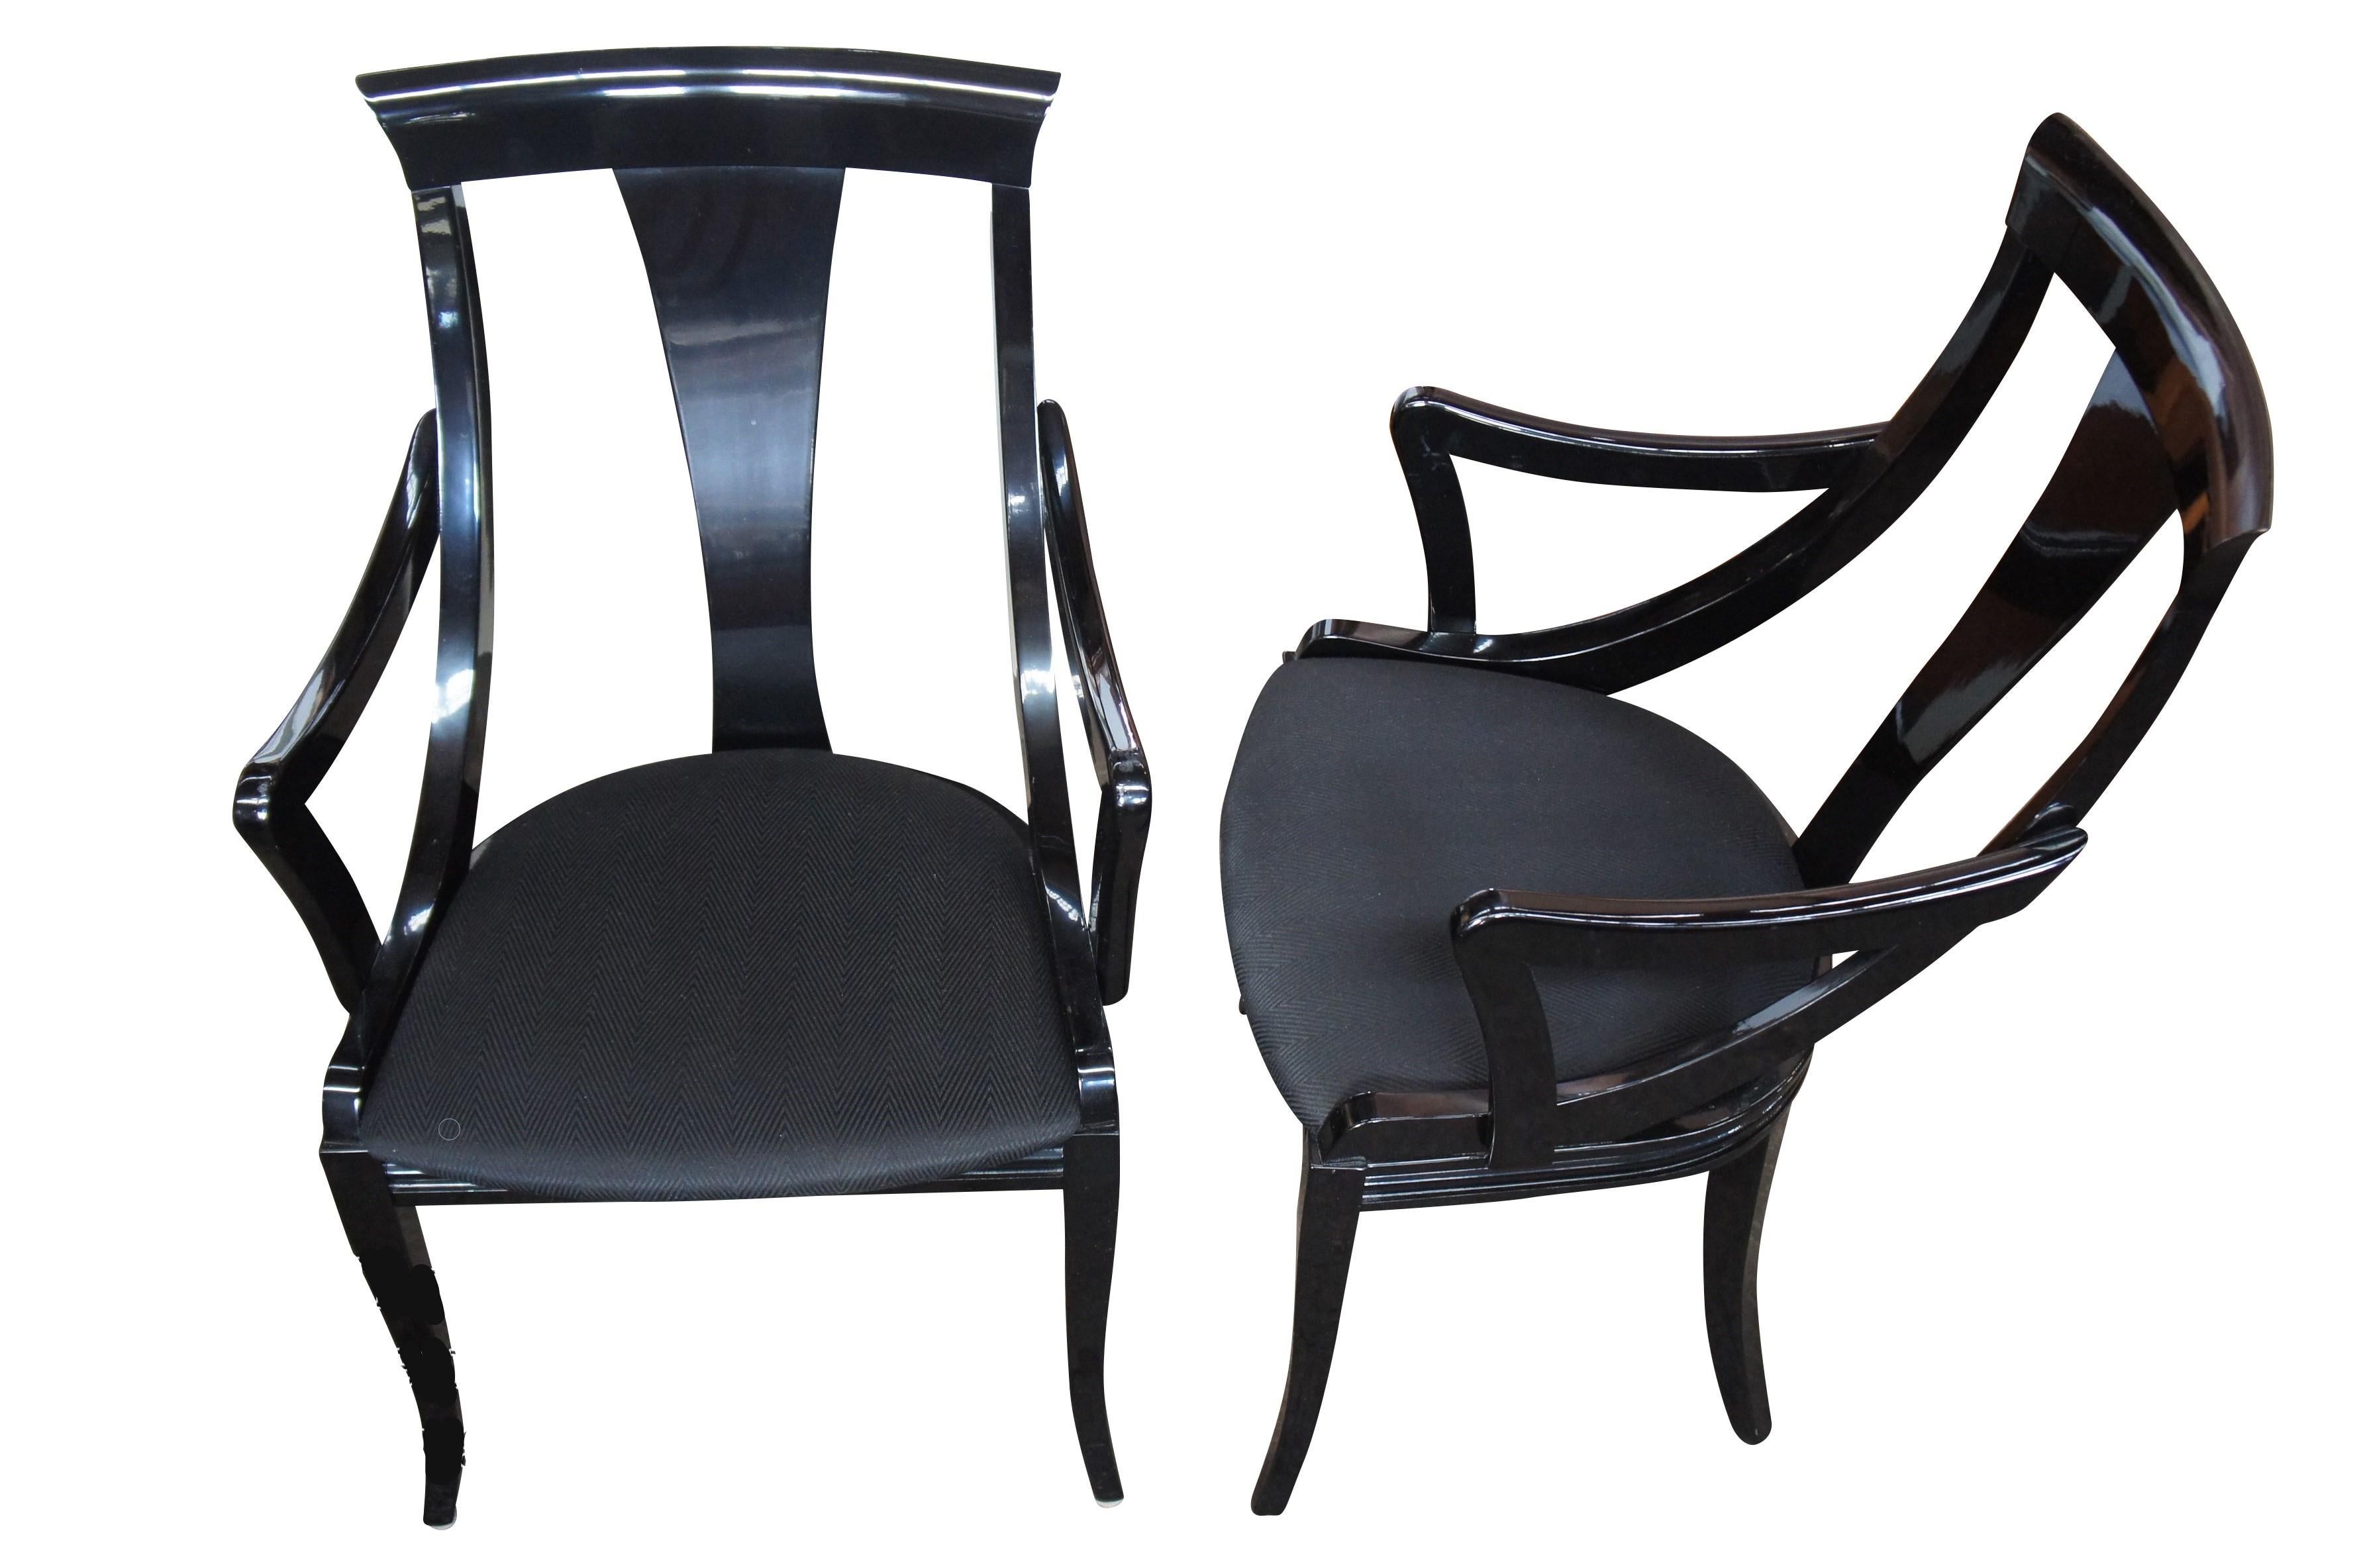 4 Sculptural Black Lacquer Dining Chairs by Pietro Costantini Italy Ello MCM Vtg

Up for consideration is a gorgeous set of 4 sculptural chairs by Pietro Costantini. Finished in a glossy black lacquer. These chairs were distributed by Ello